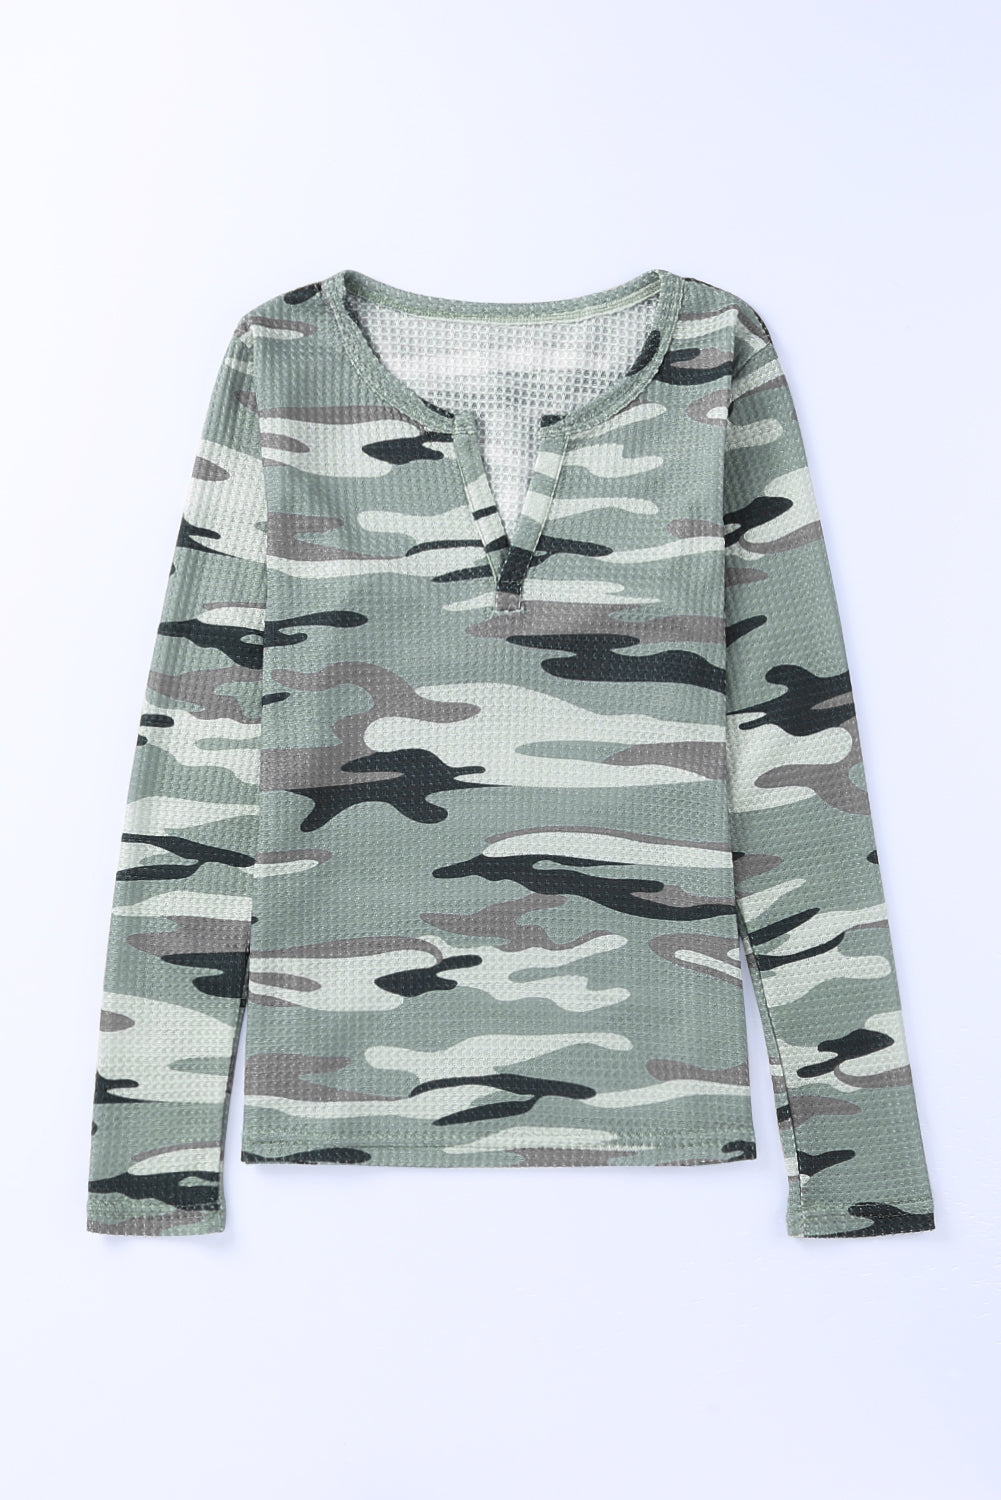 Green Camouflage Waffle Knit V Neck Top Long Sleeve Tops JT's Designer Fashion